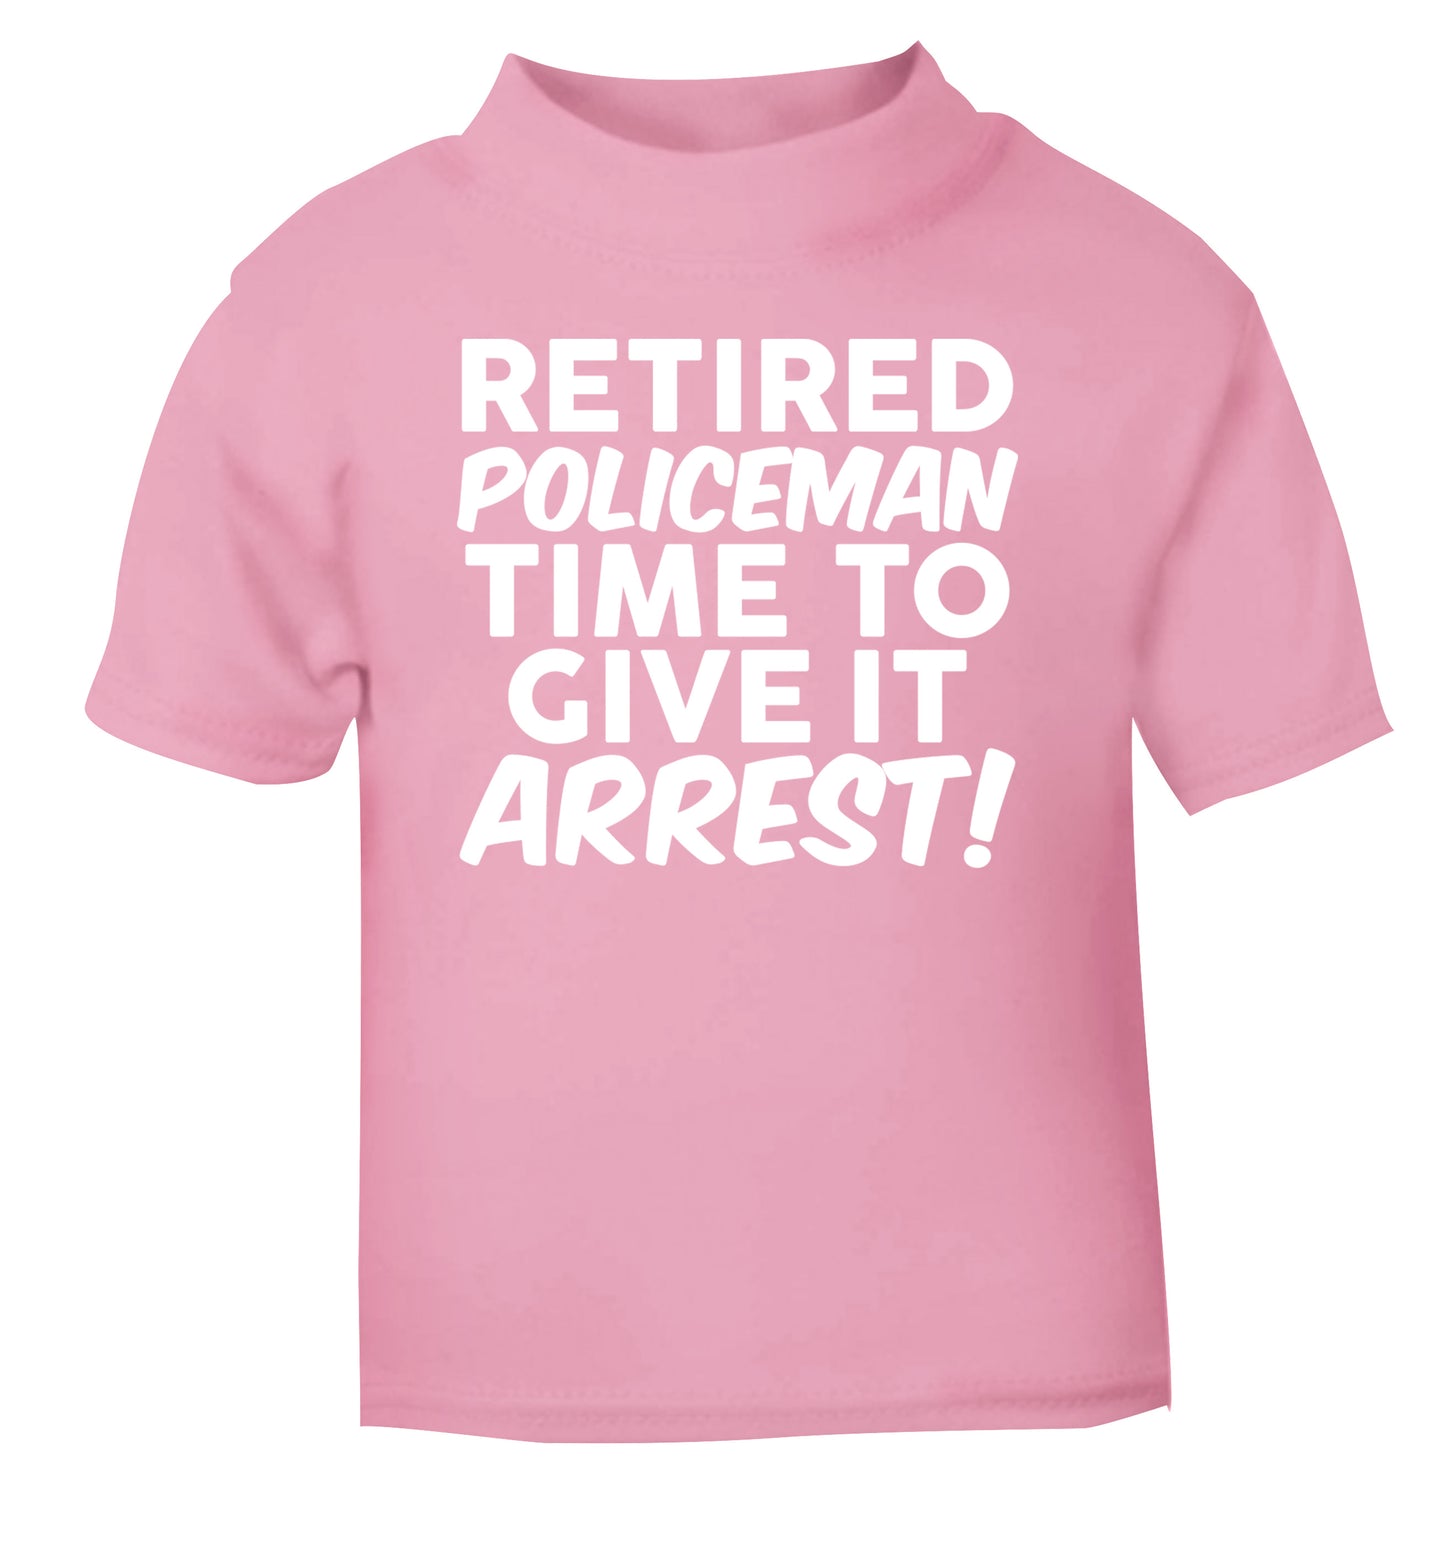 Retired policeman give it arresst! light pink Baby Toddler Tshirt 2 Years